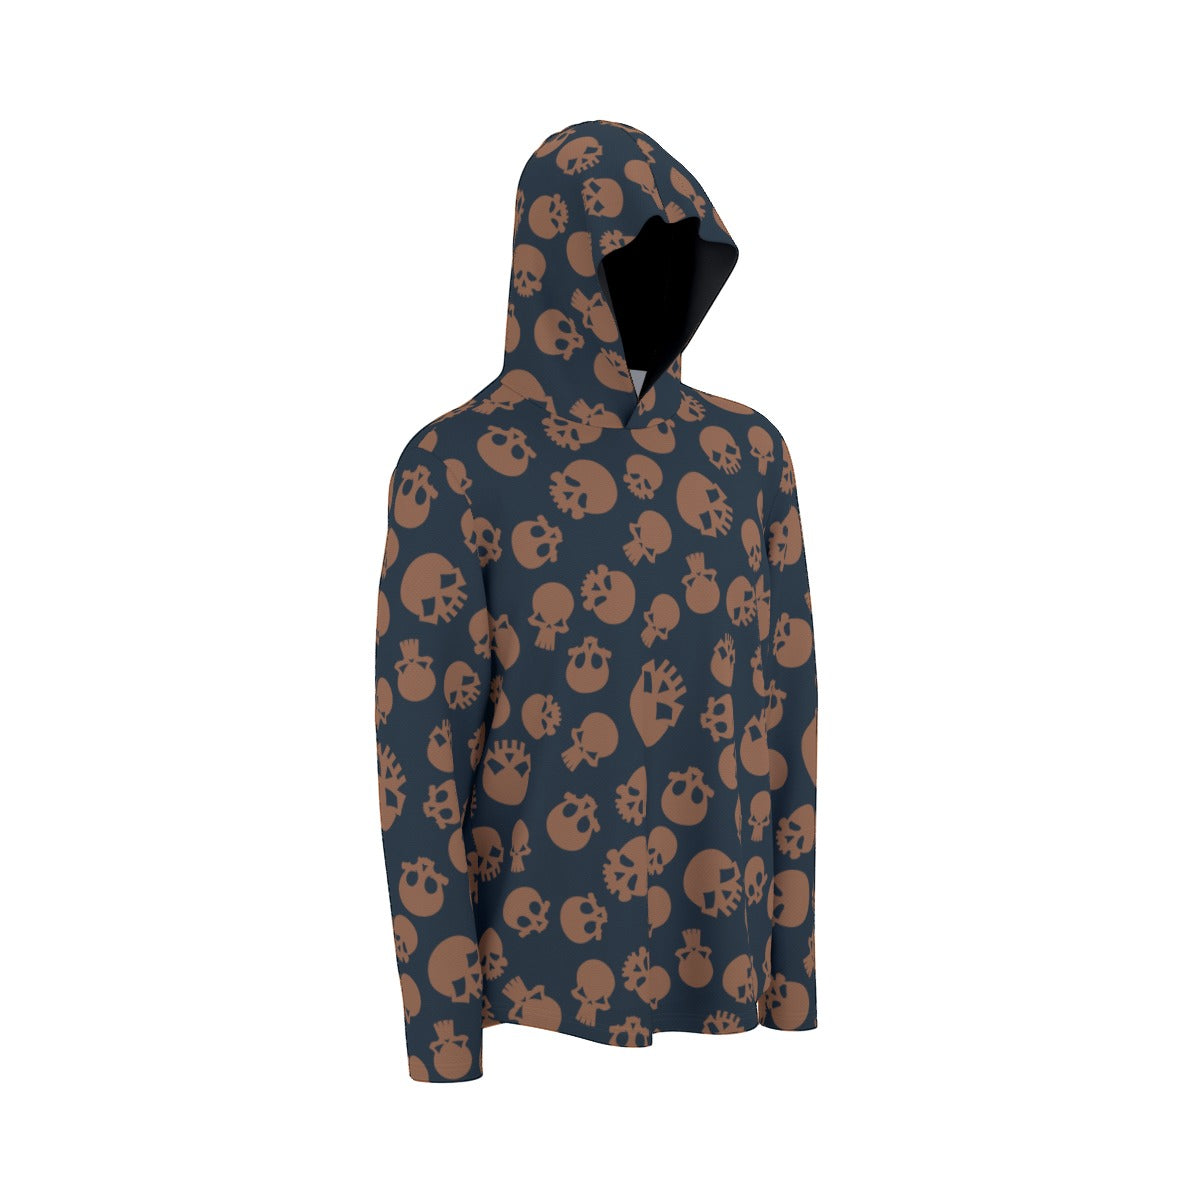 Bronze Skulls Sunscreen Sports Hoodie With Thumb Holes